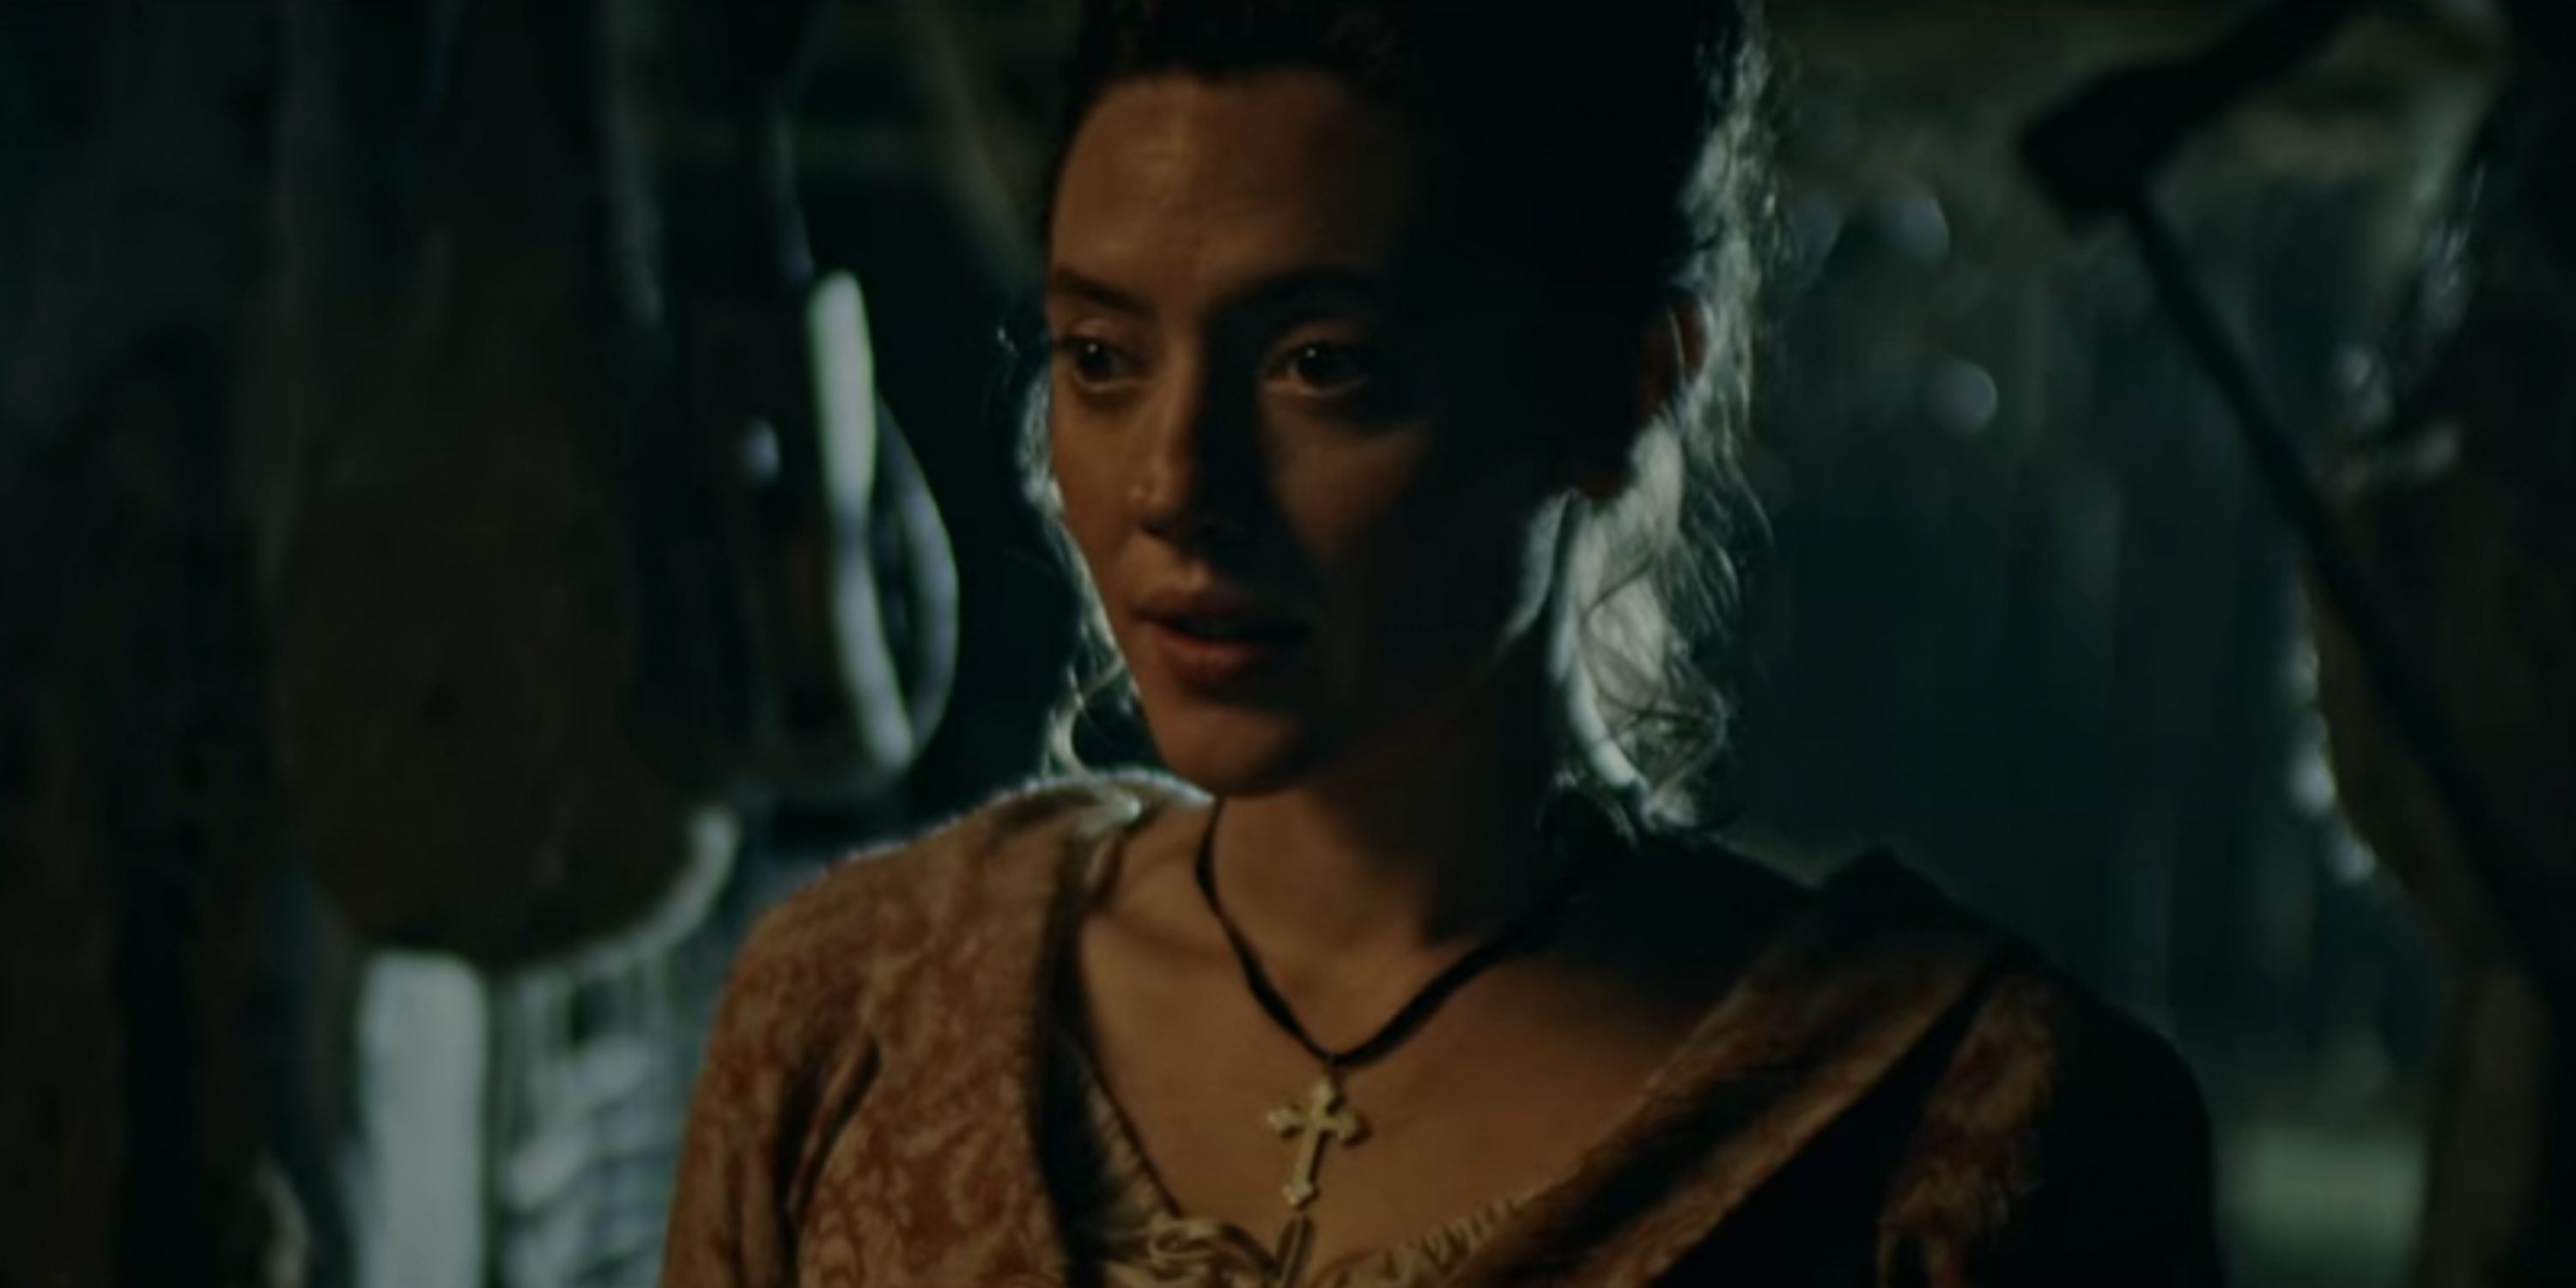 Sinead MacInnes as Mary Hallet in The Lost Pirate Kingdom on Netflix